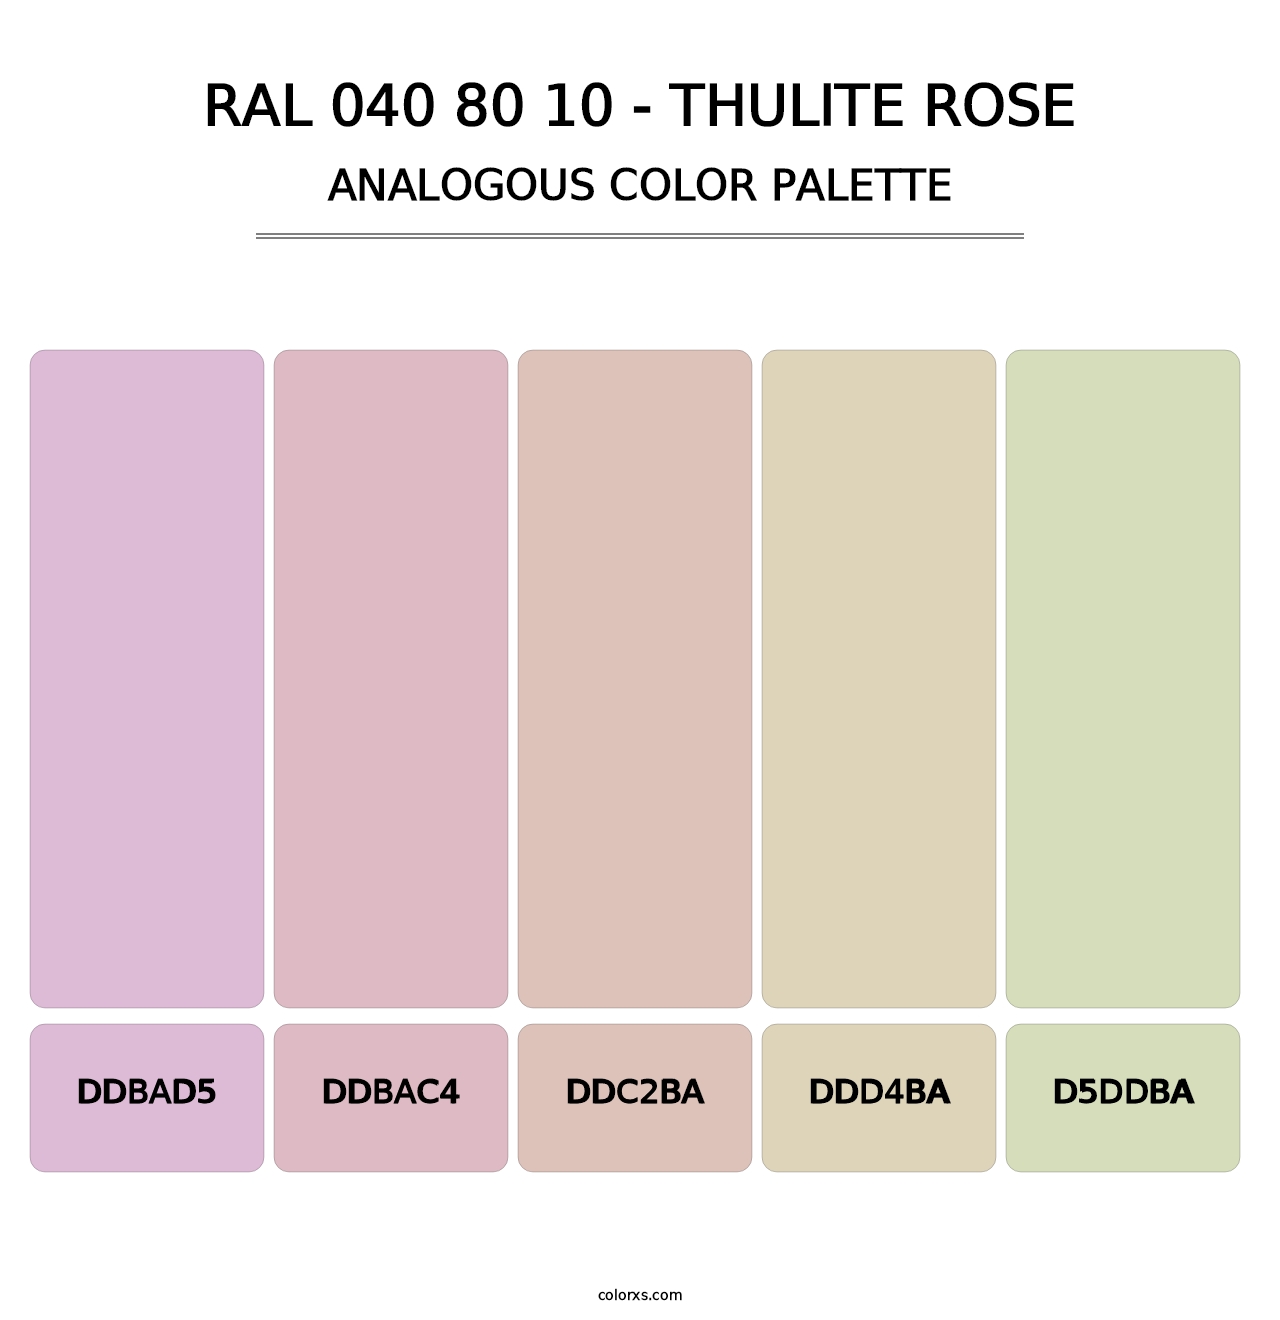 RAL 040 80 10 - Thulite Rose - Analogous Color Palette